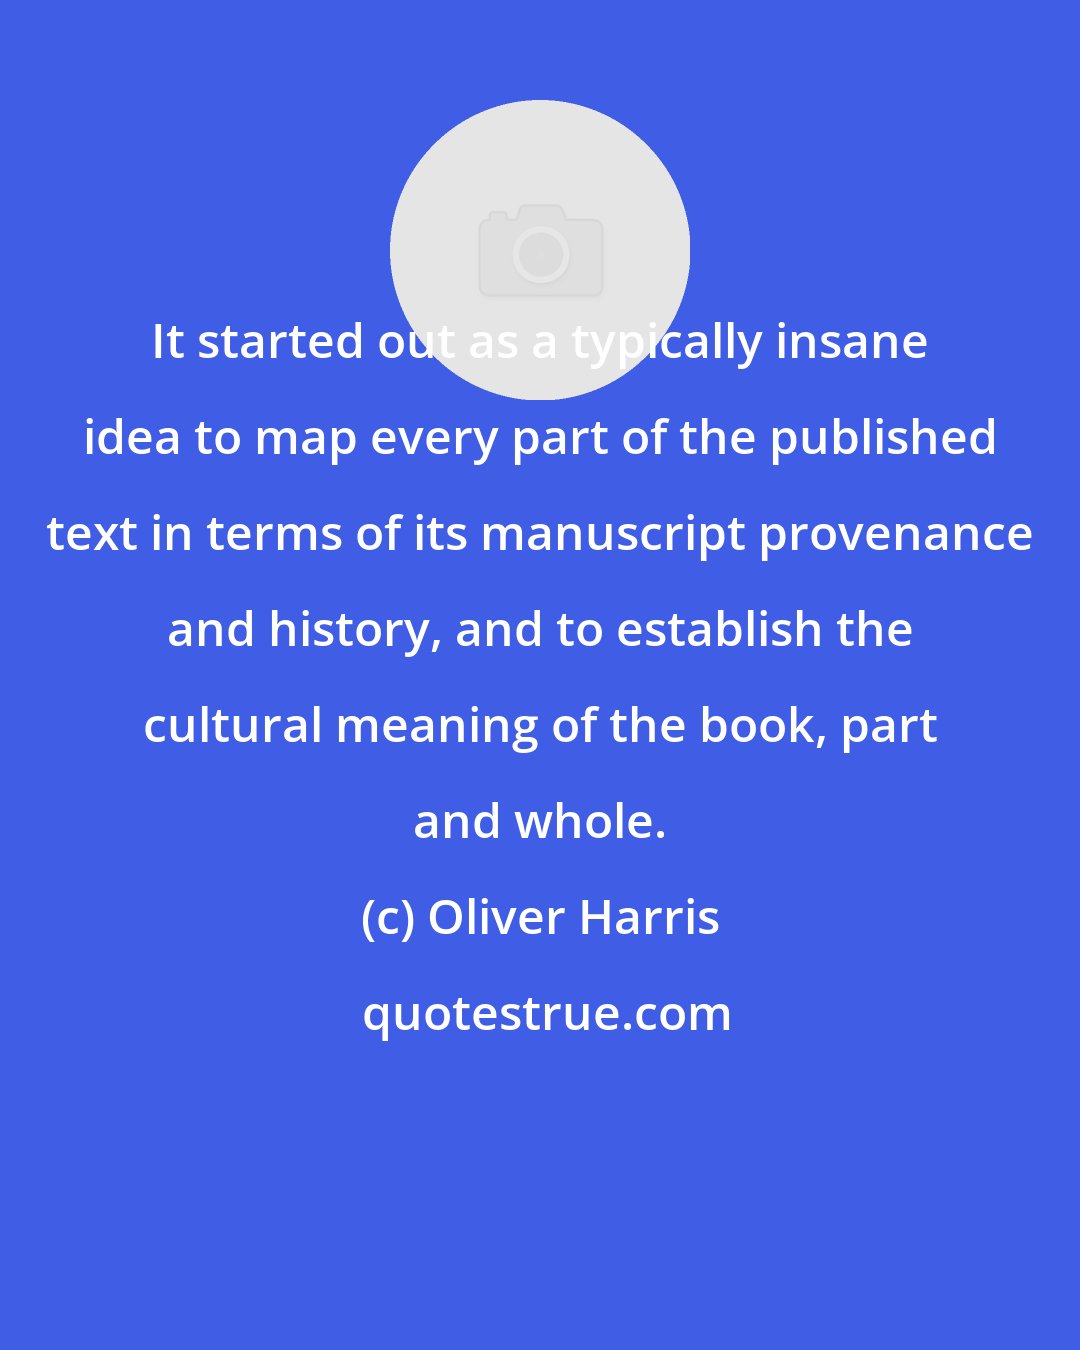 Oliver Harris: It started out as a typically insane idea to map every part of the published text in terms of its manuscript provenance and history, and to establish the cultural meaning of the book, part and whole.